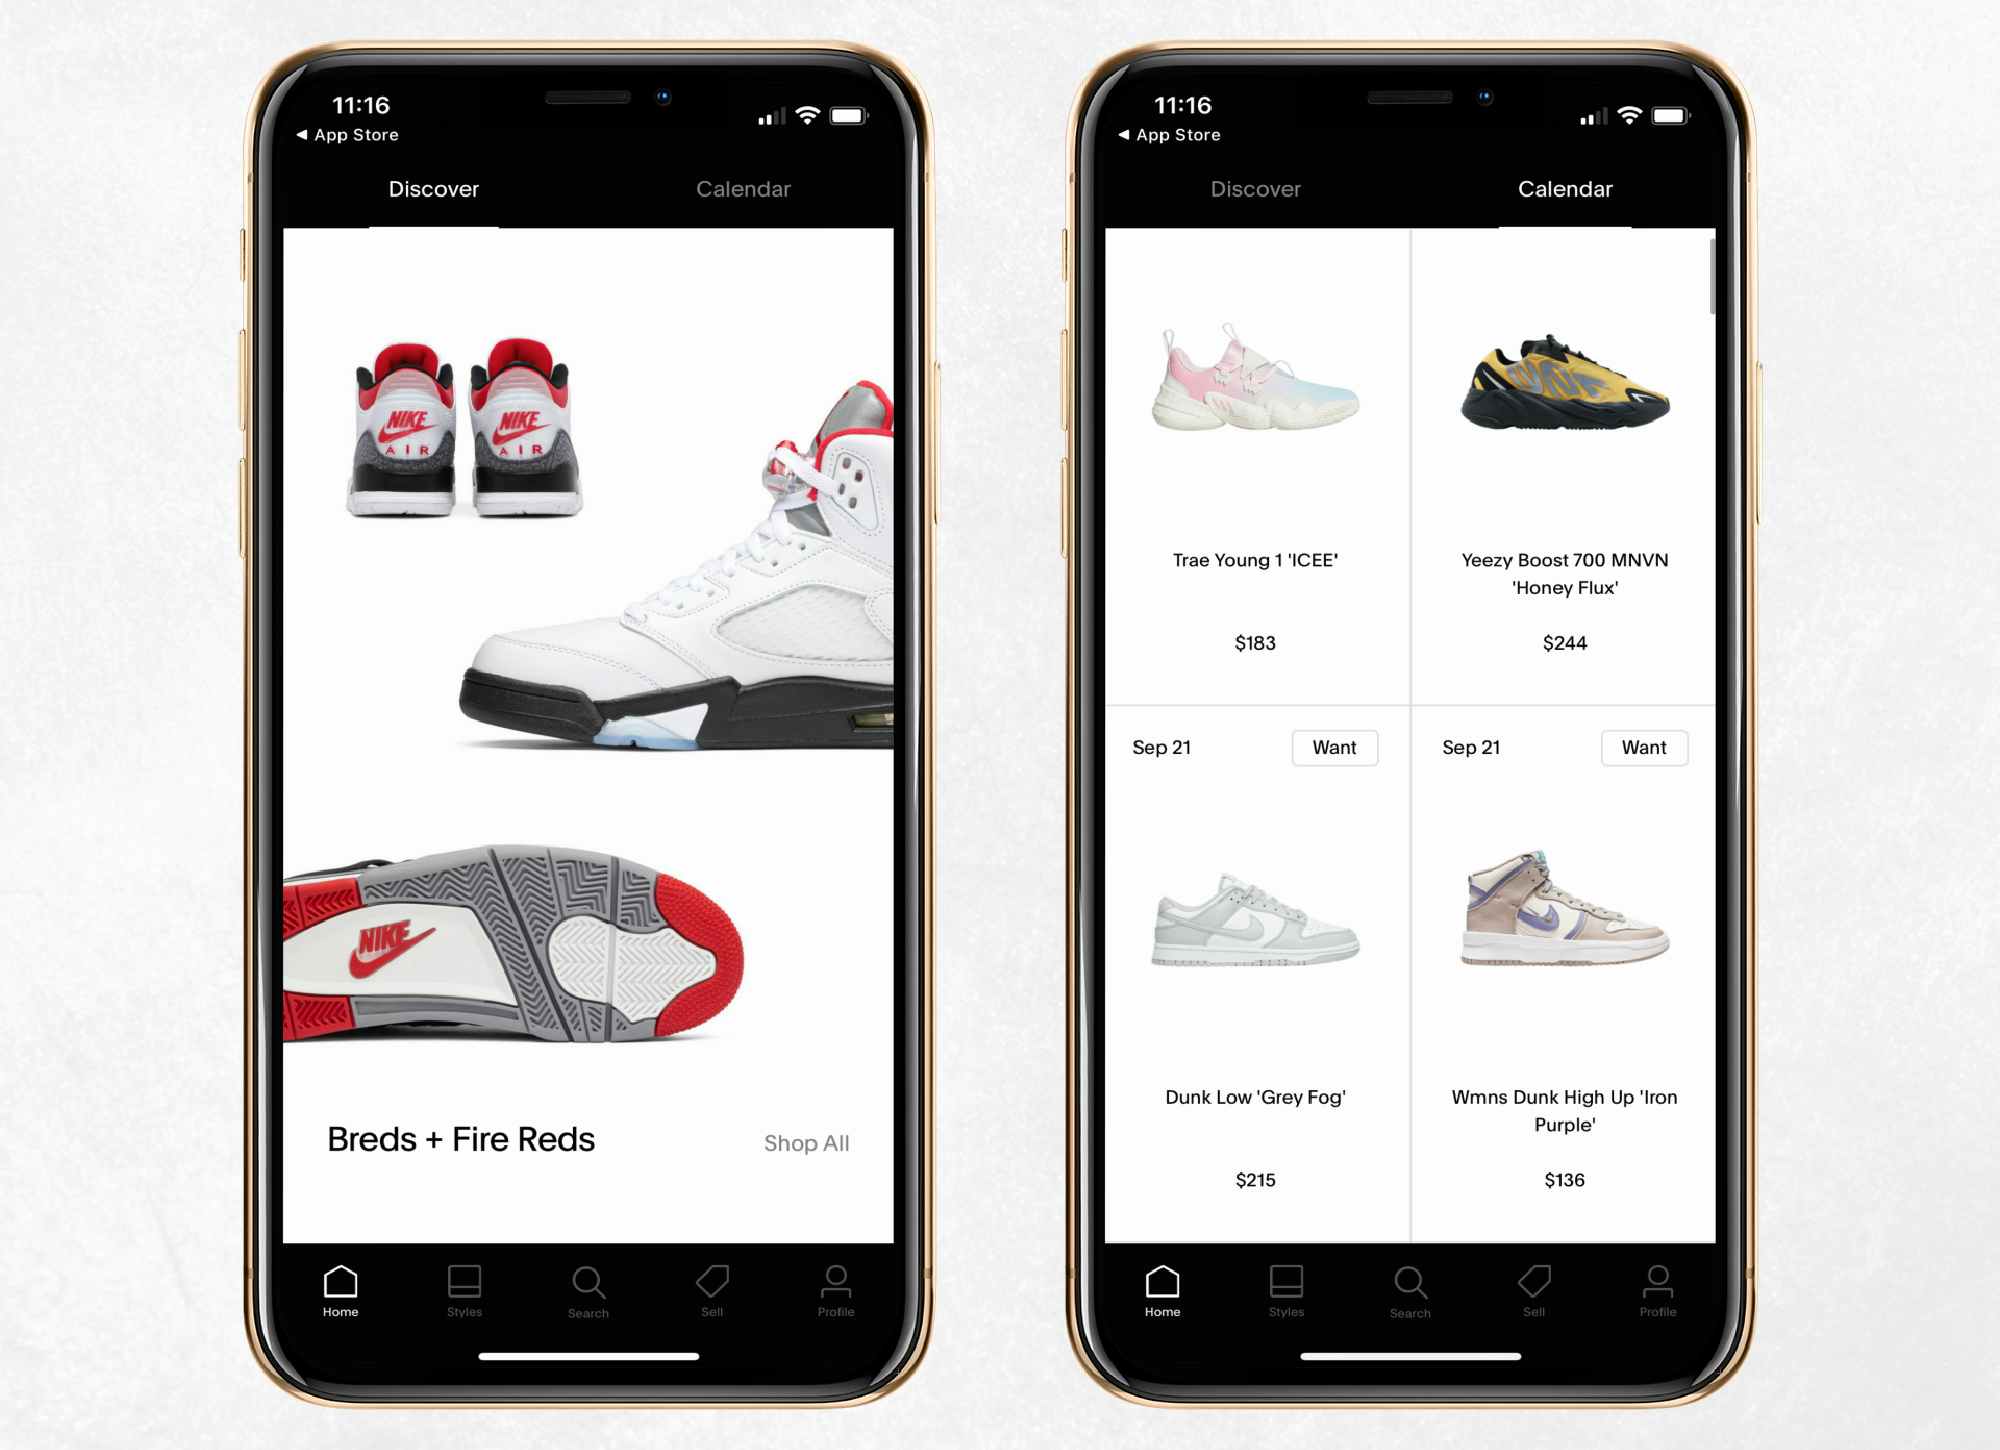 goat mobile app screenshots of discover page and calendar drops for new sneakers